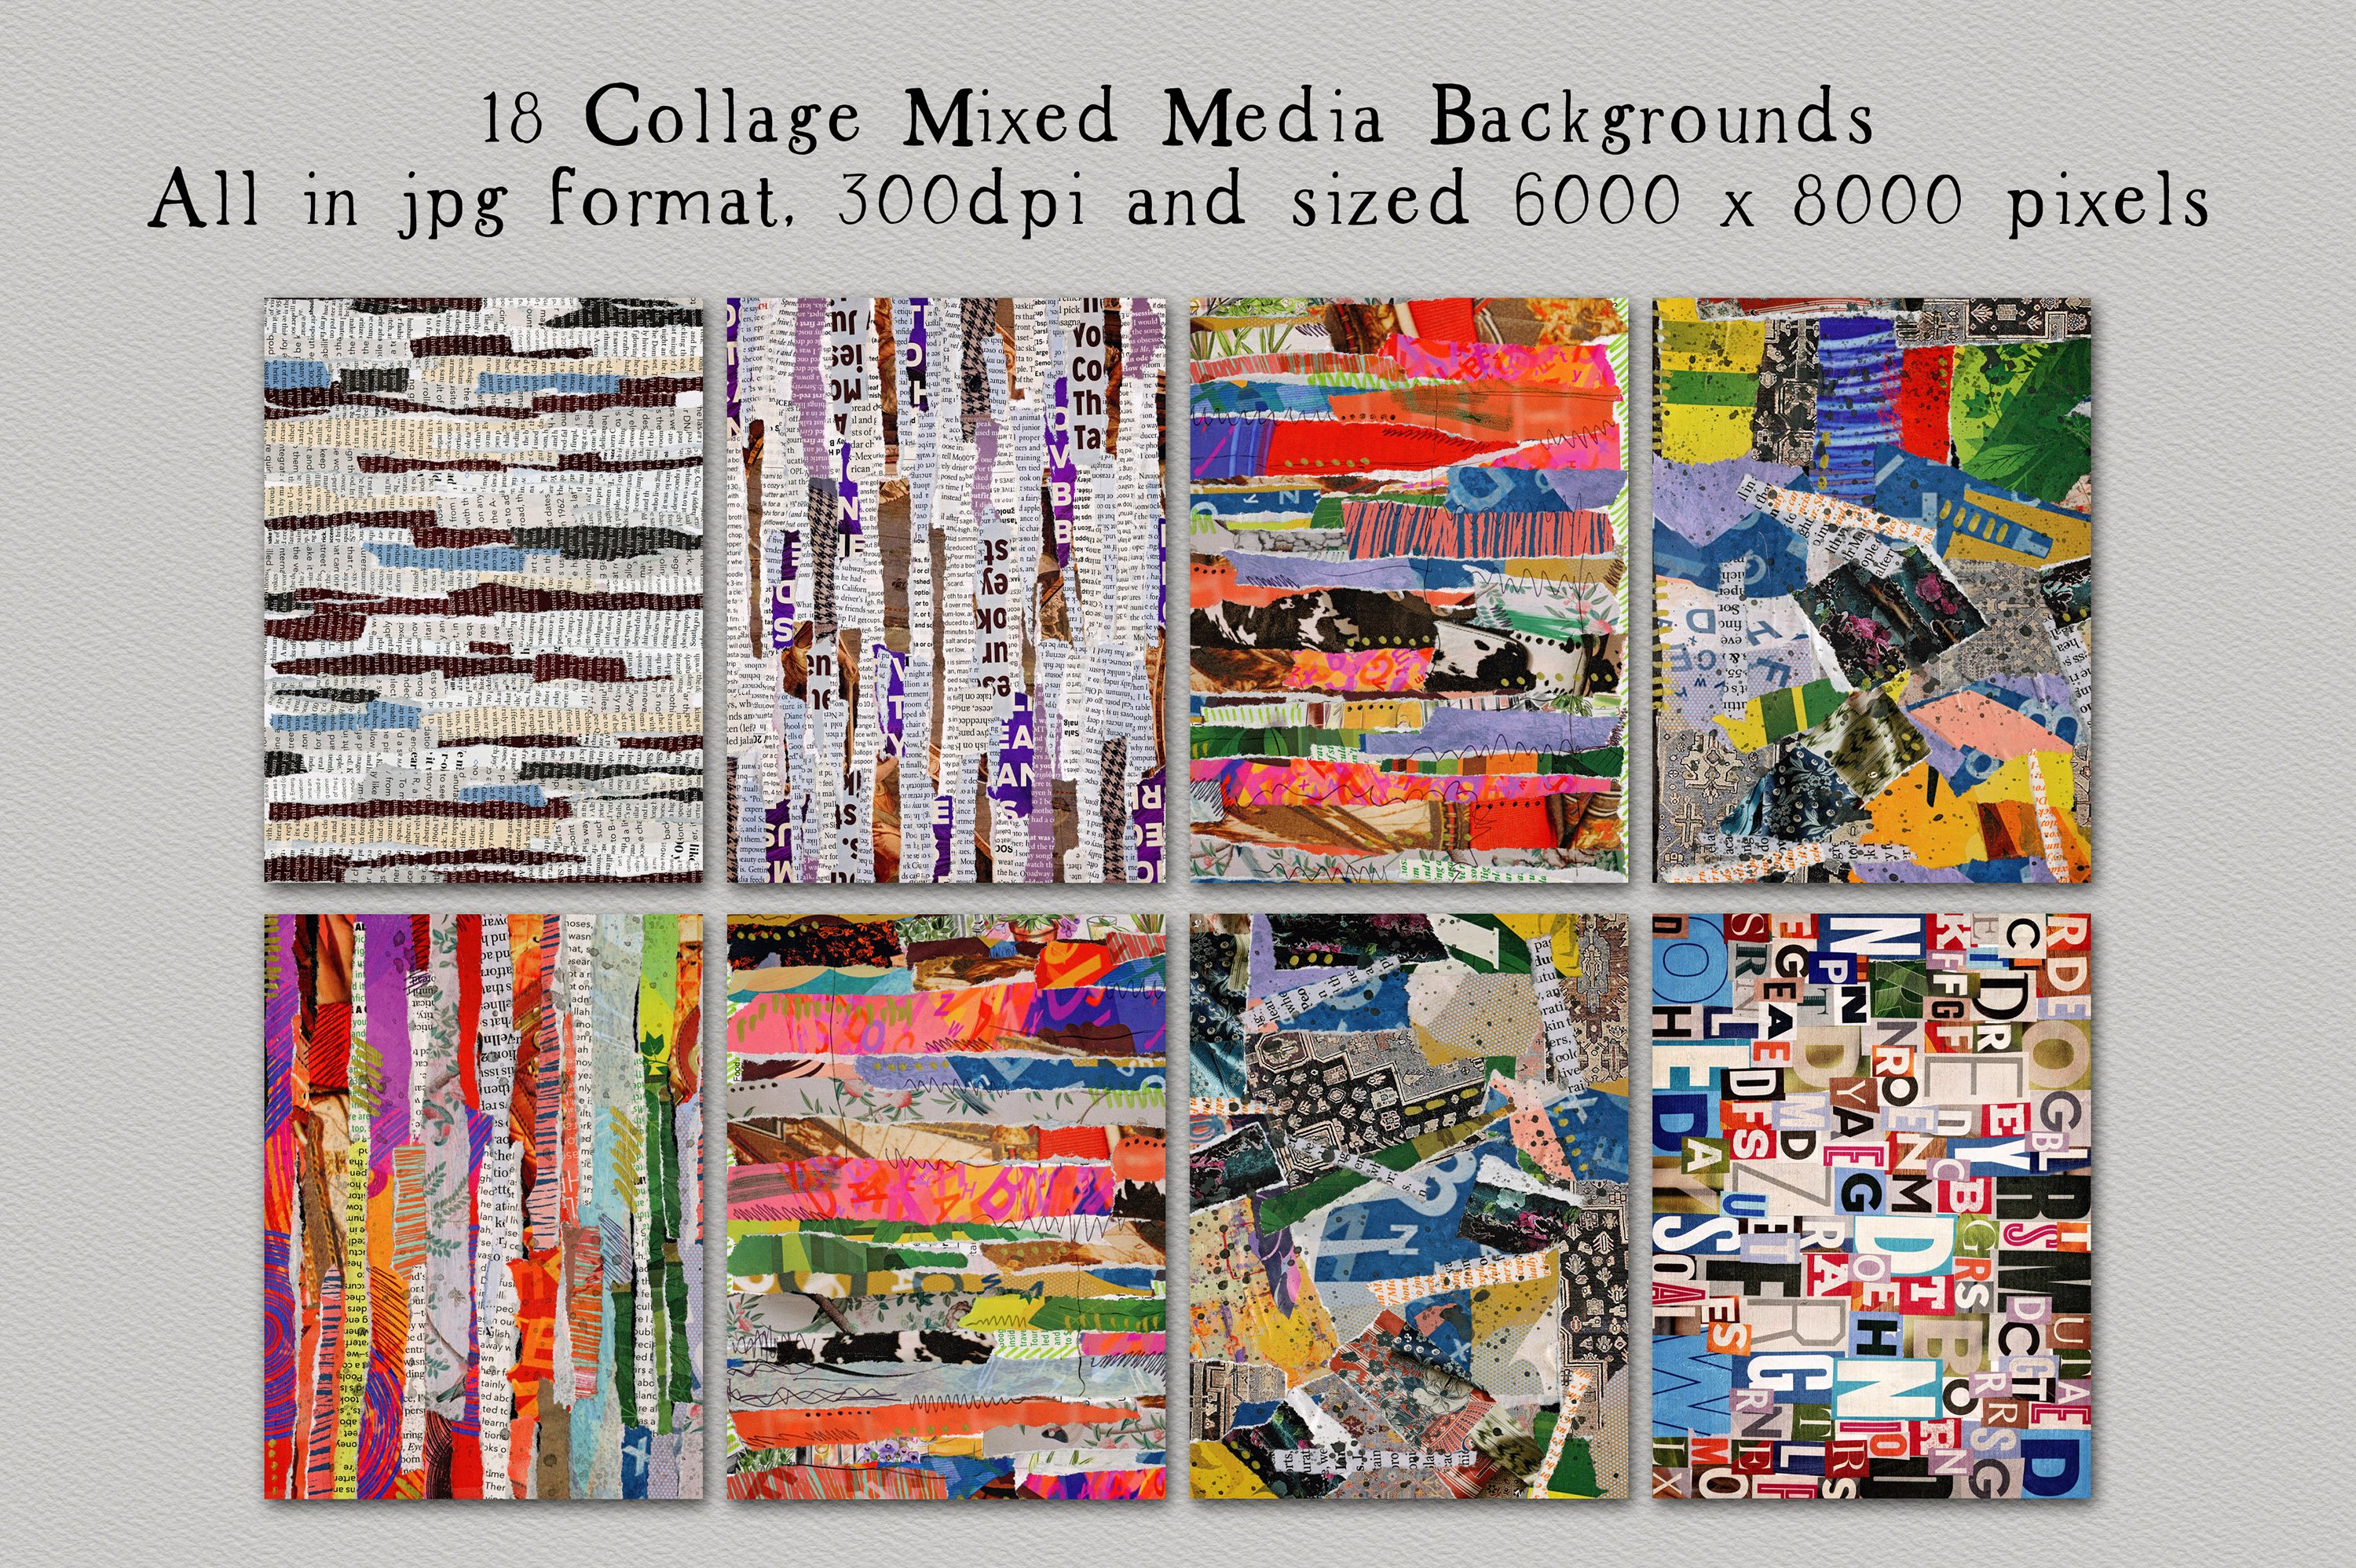 Paper Collage Png's and Backgrounds-7.jpg